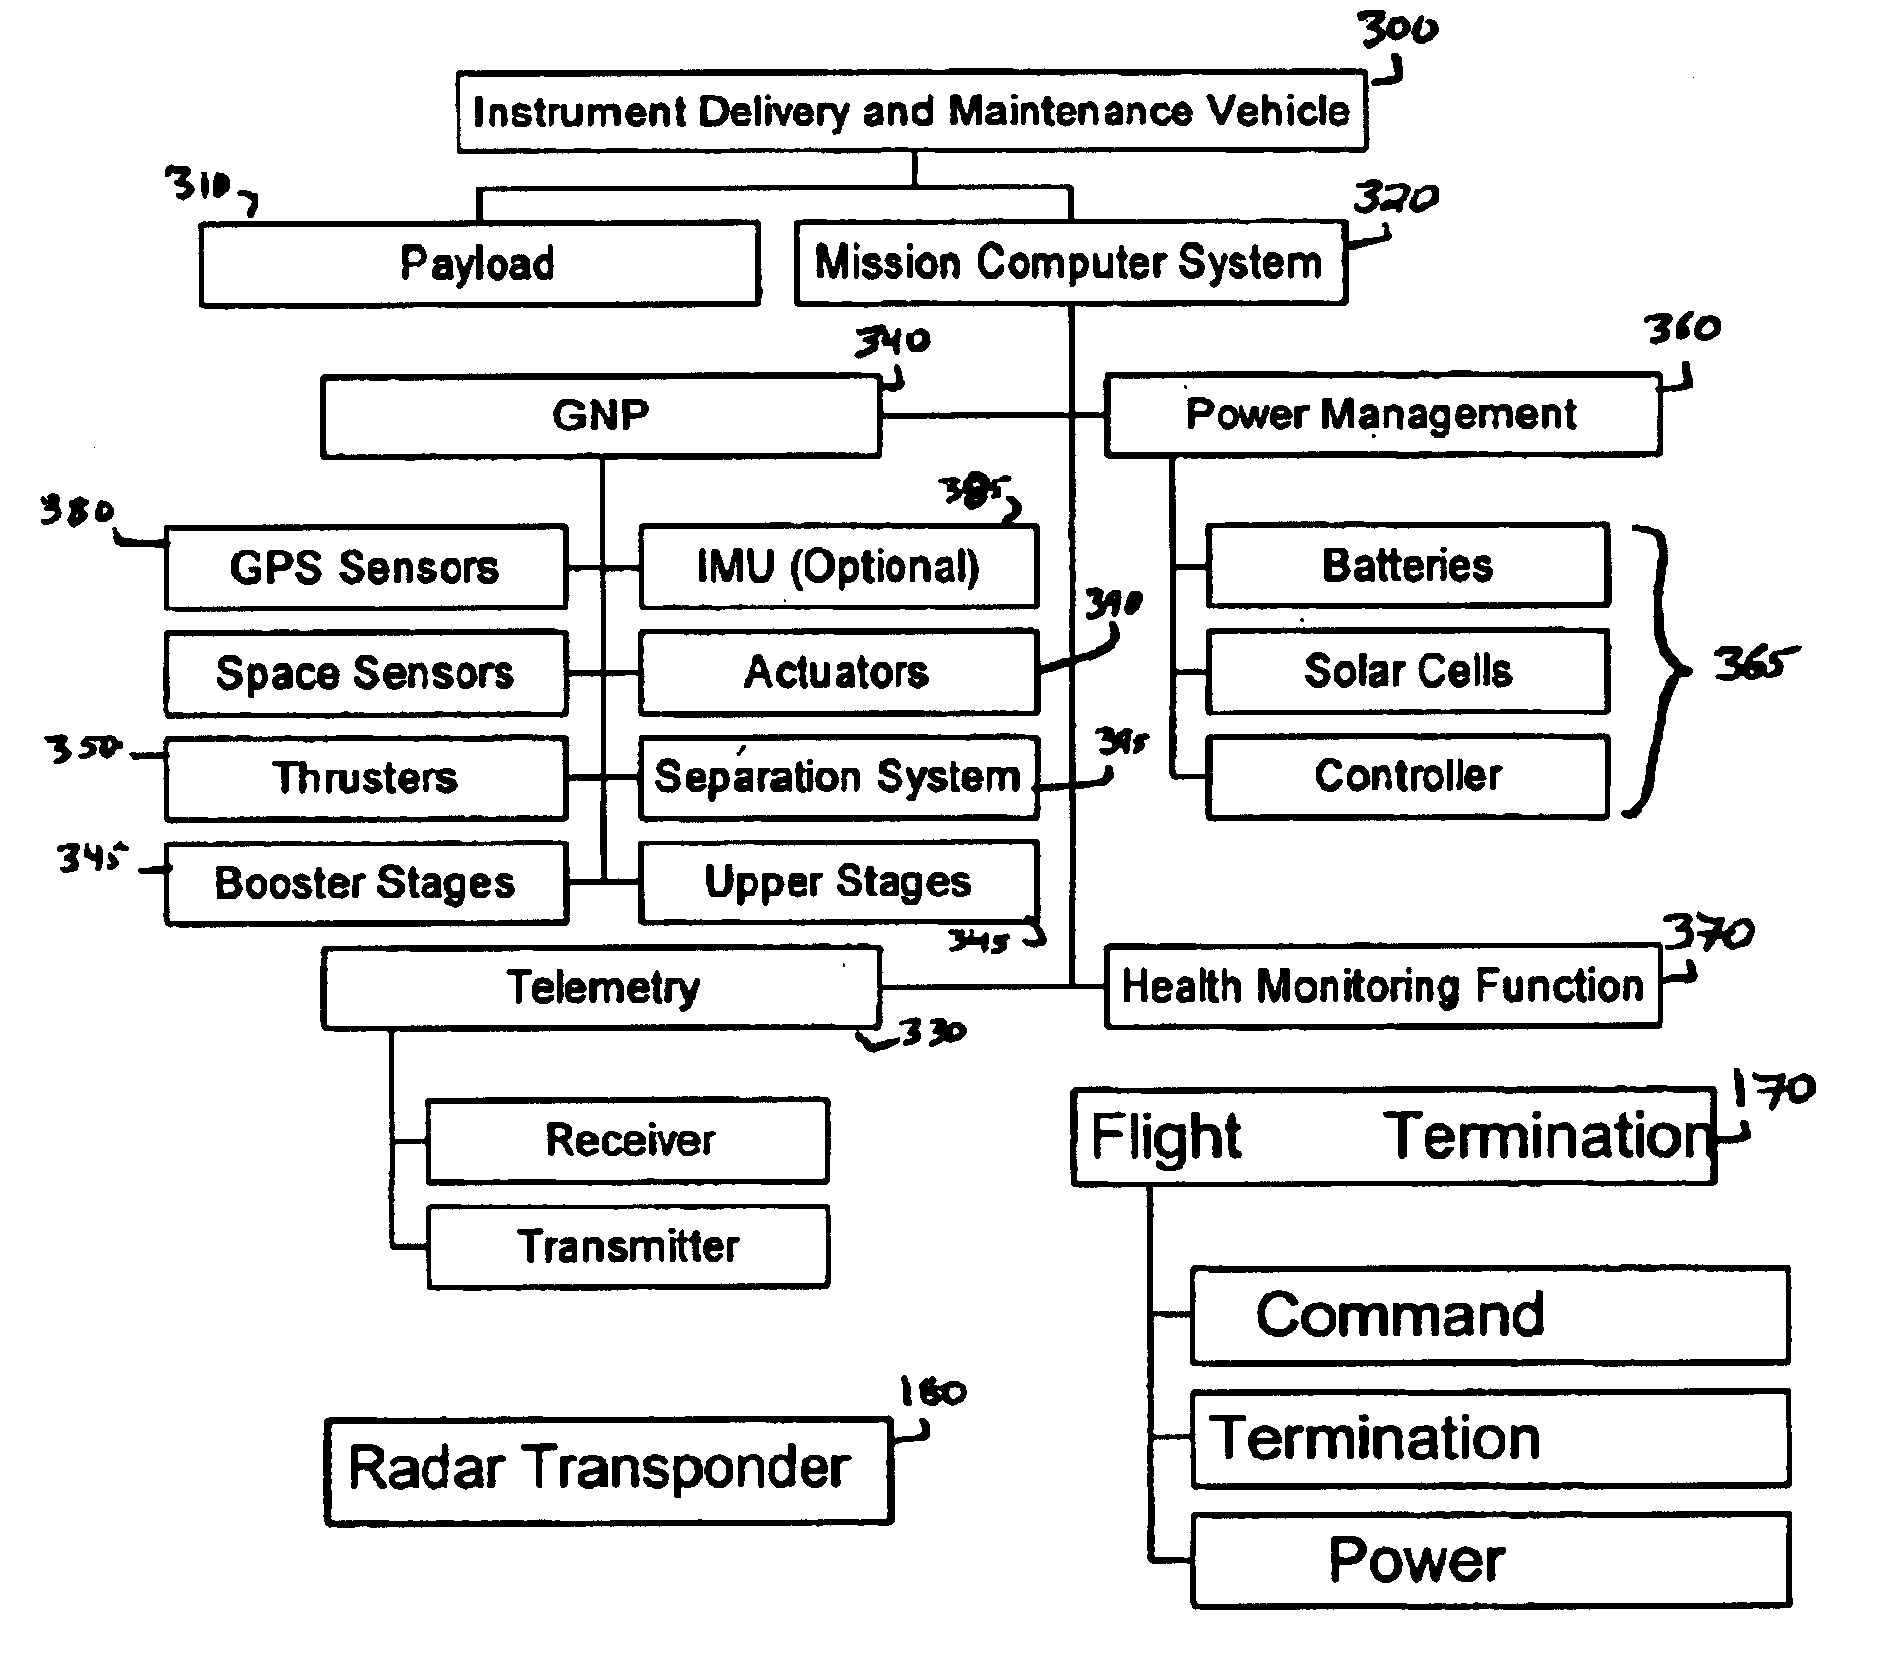 System for the delivery and orbital maintenance of micro satellites and small space-based instruments